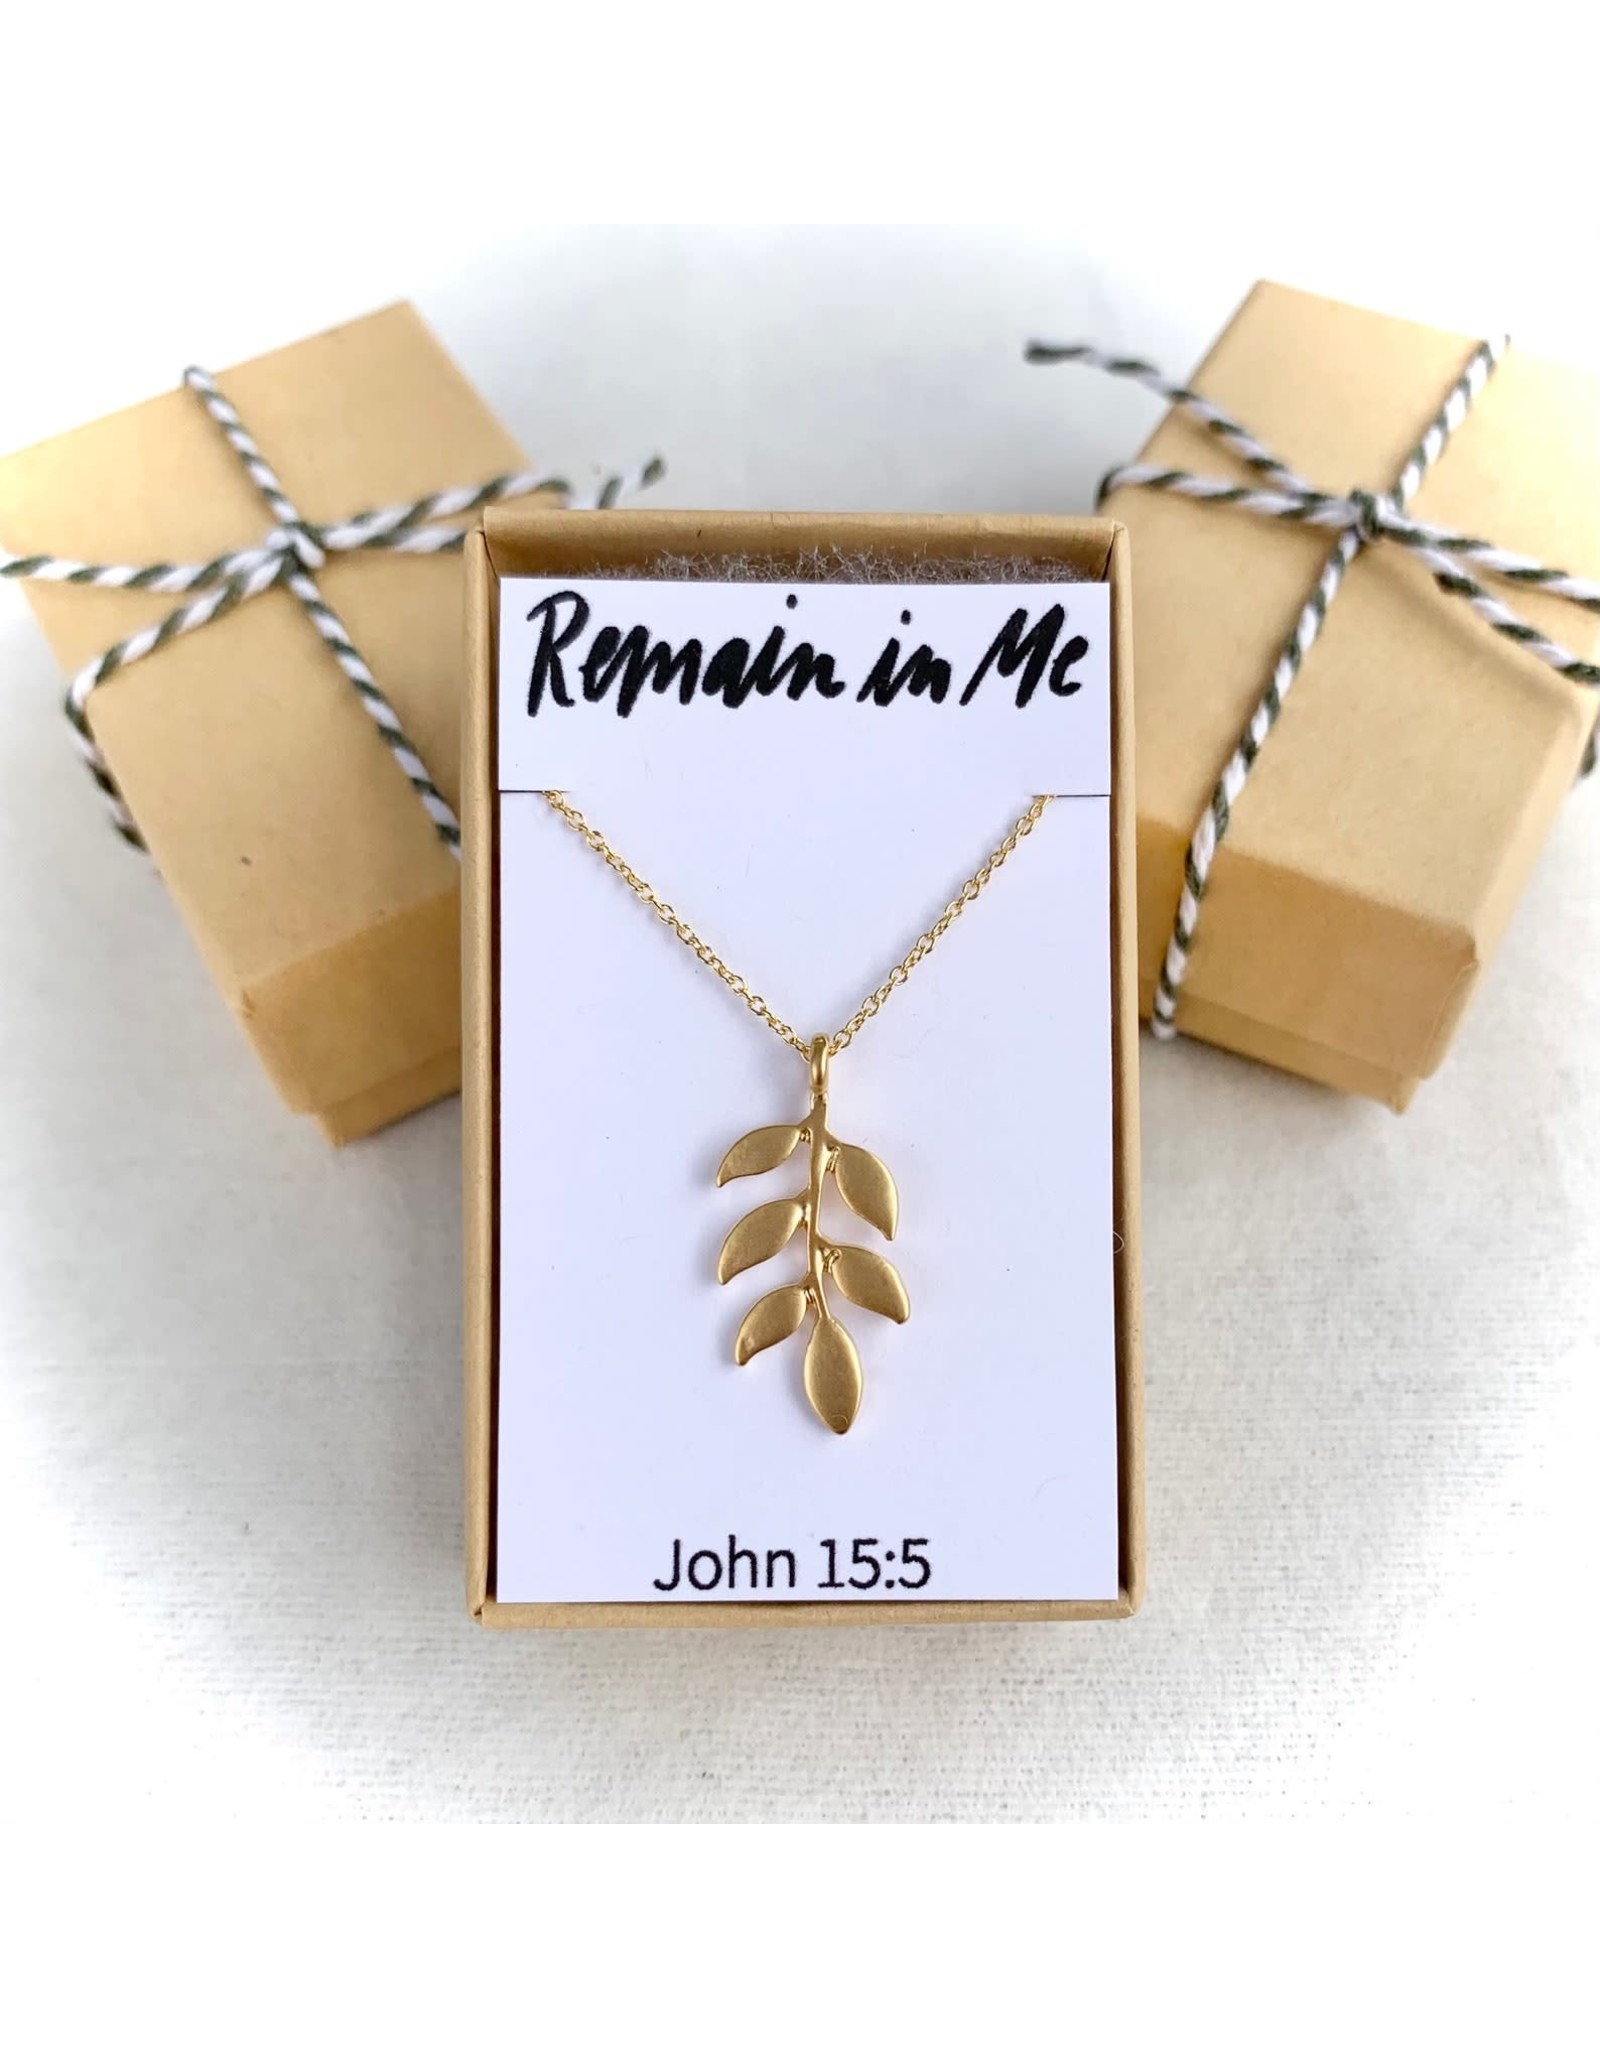 Seeds & Mountains Bible Verse Necklace - Remain in Me (John 15:5)